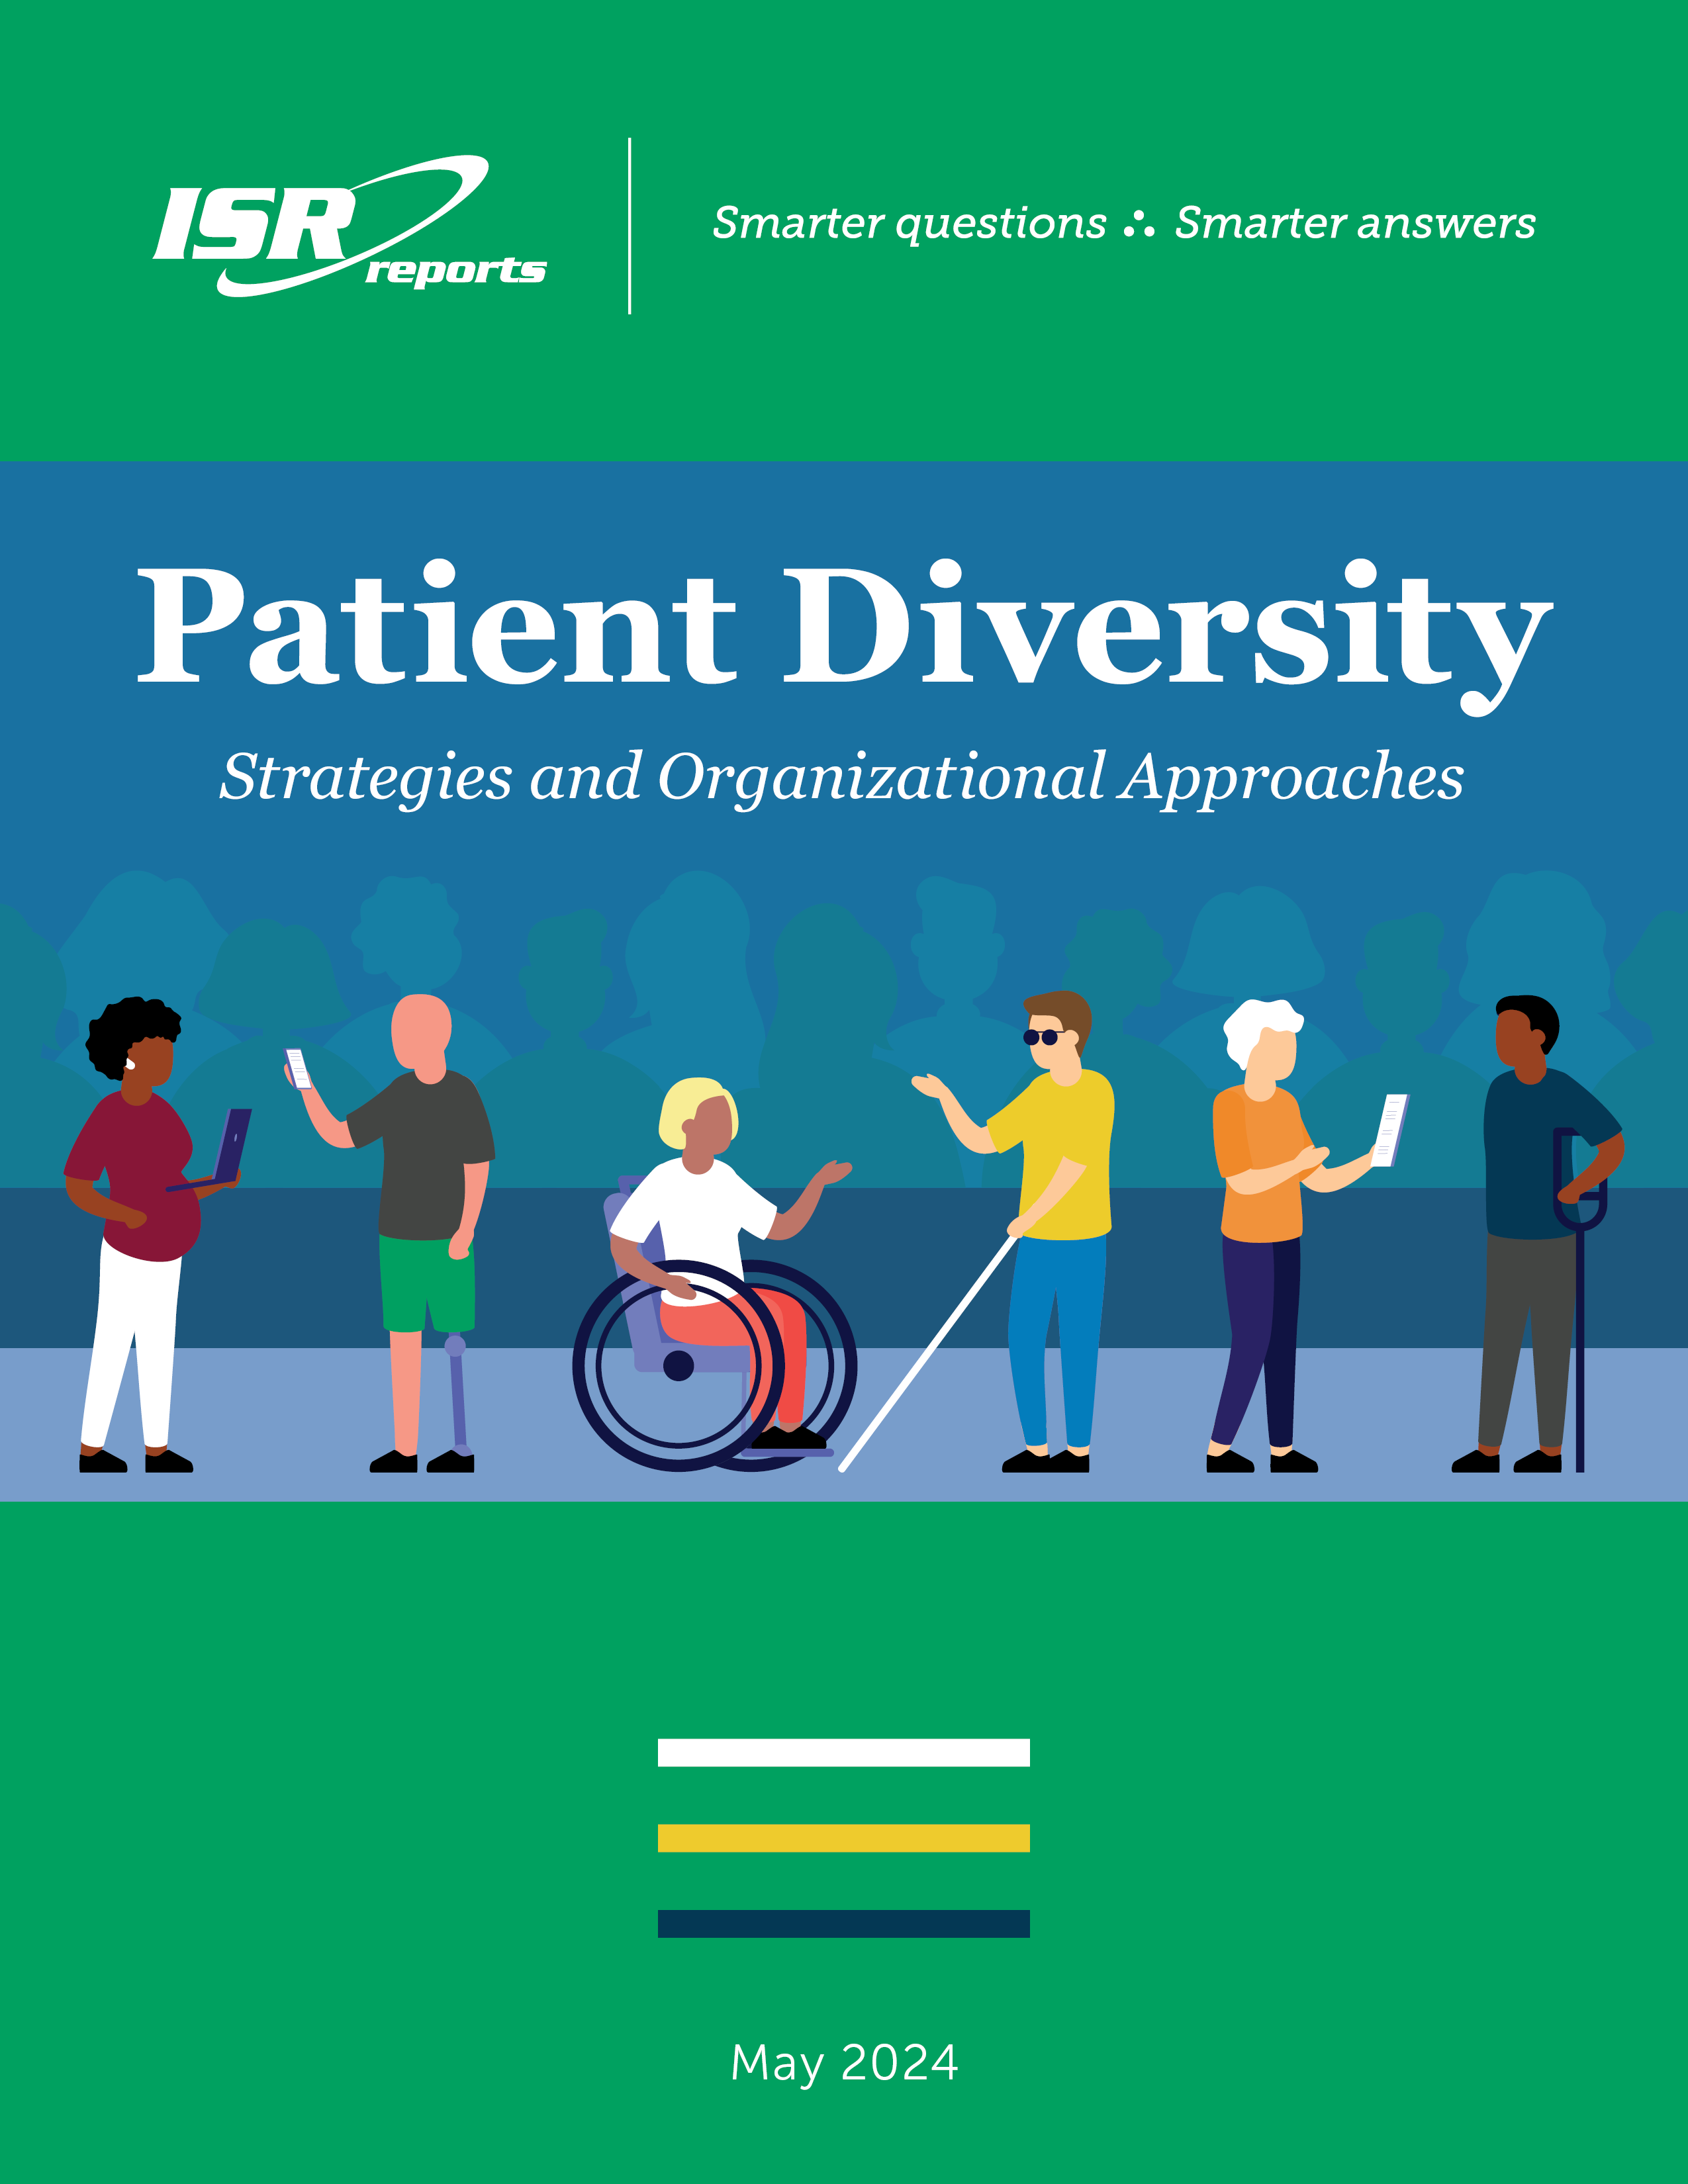 Patient Diversity: Strategies and Organizational Approaches